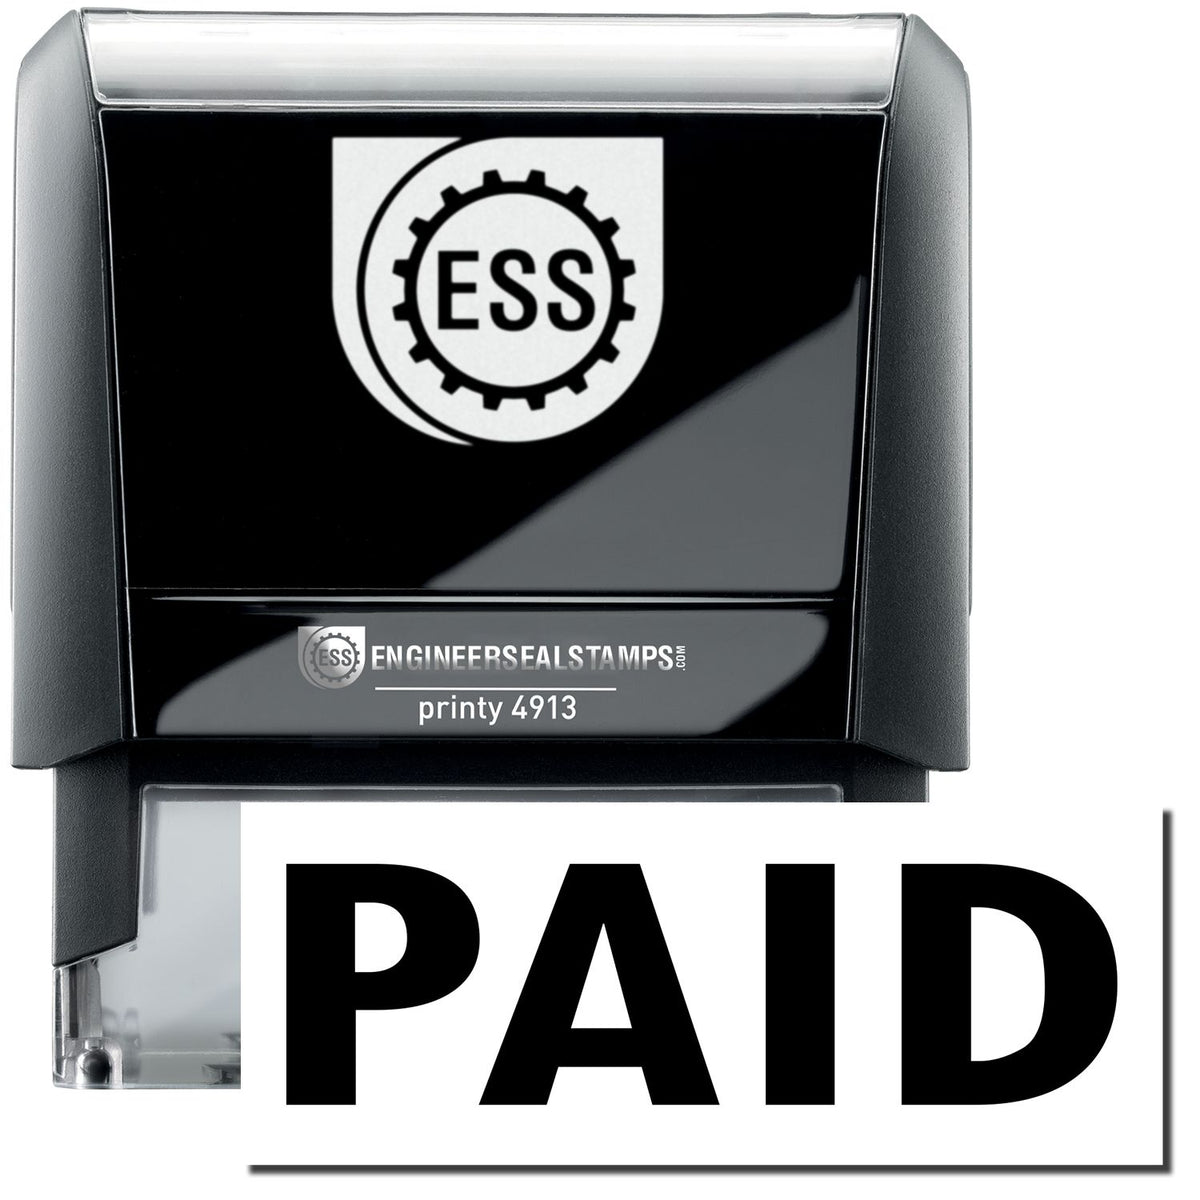 A self-inking stamp with a stamped image showing how the text &quot;PAID&quot; in a large bold font is displayed by it.